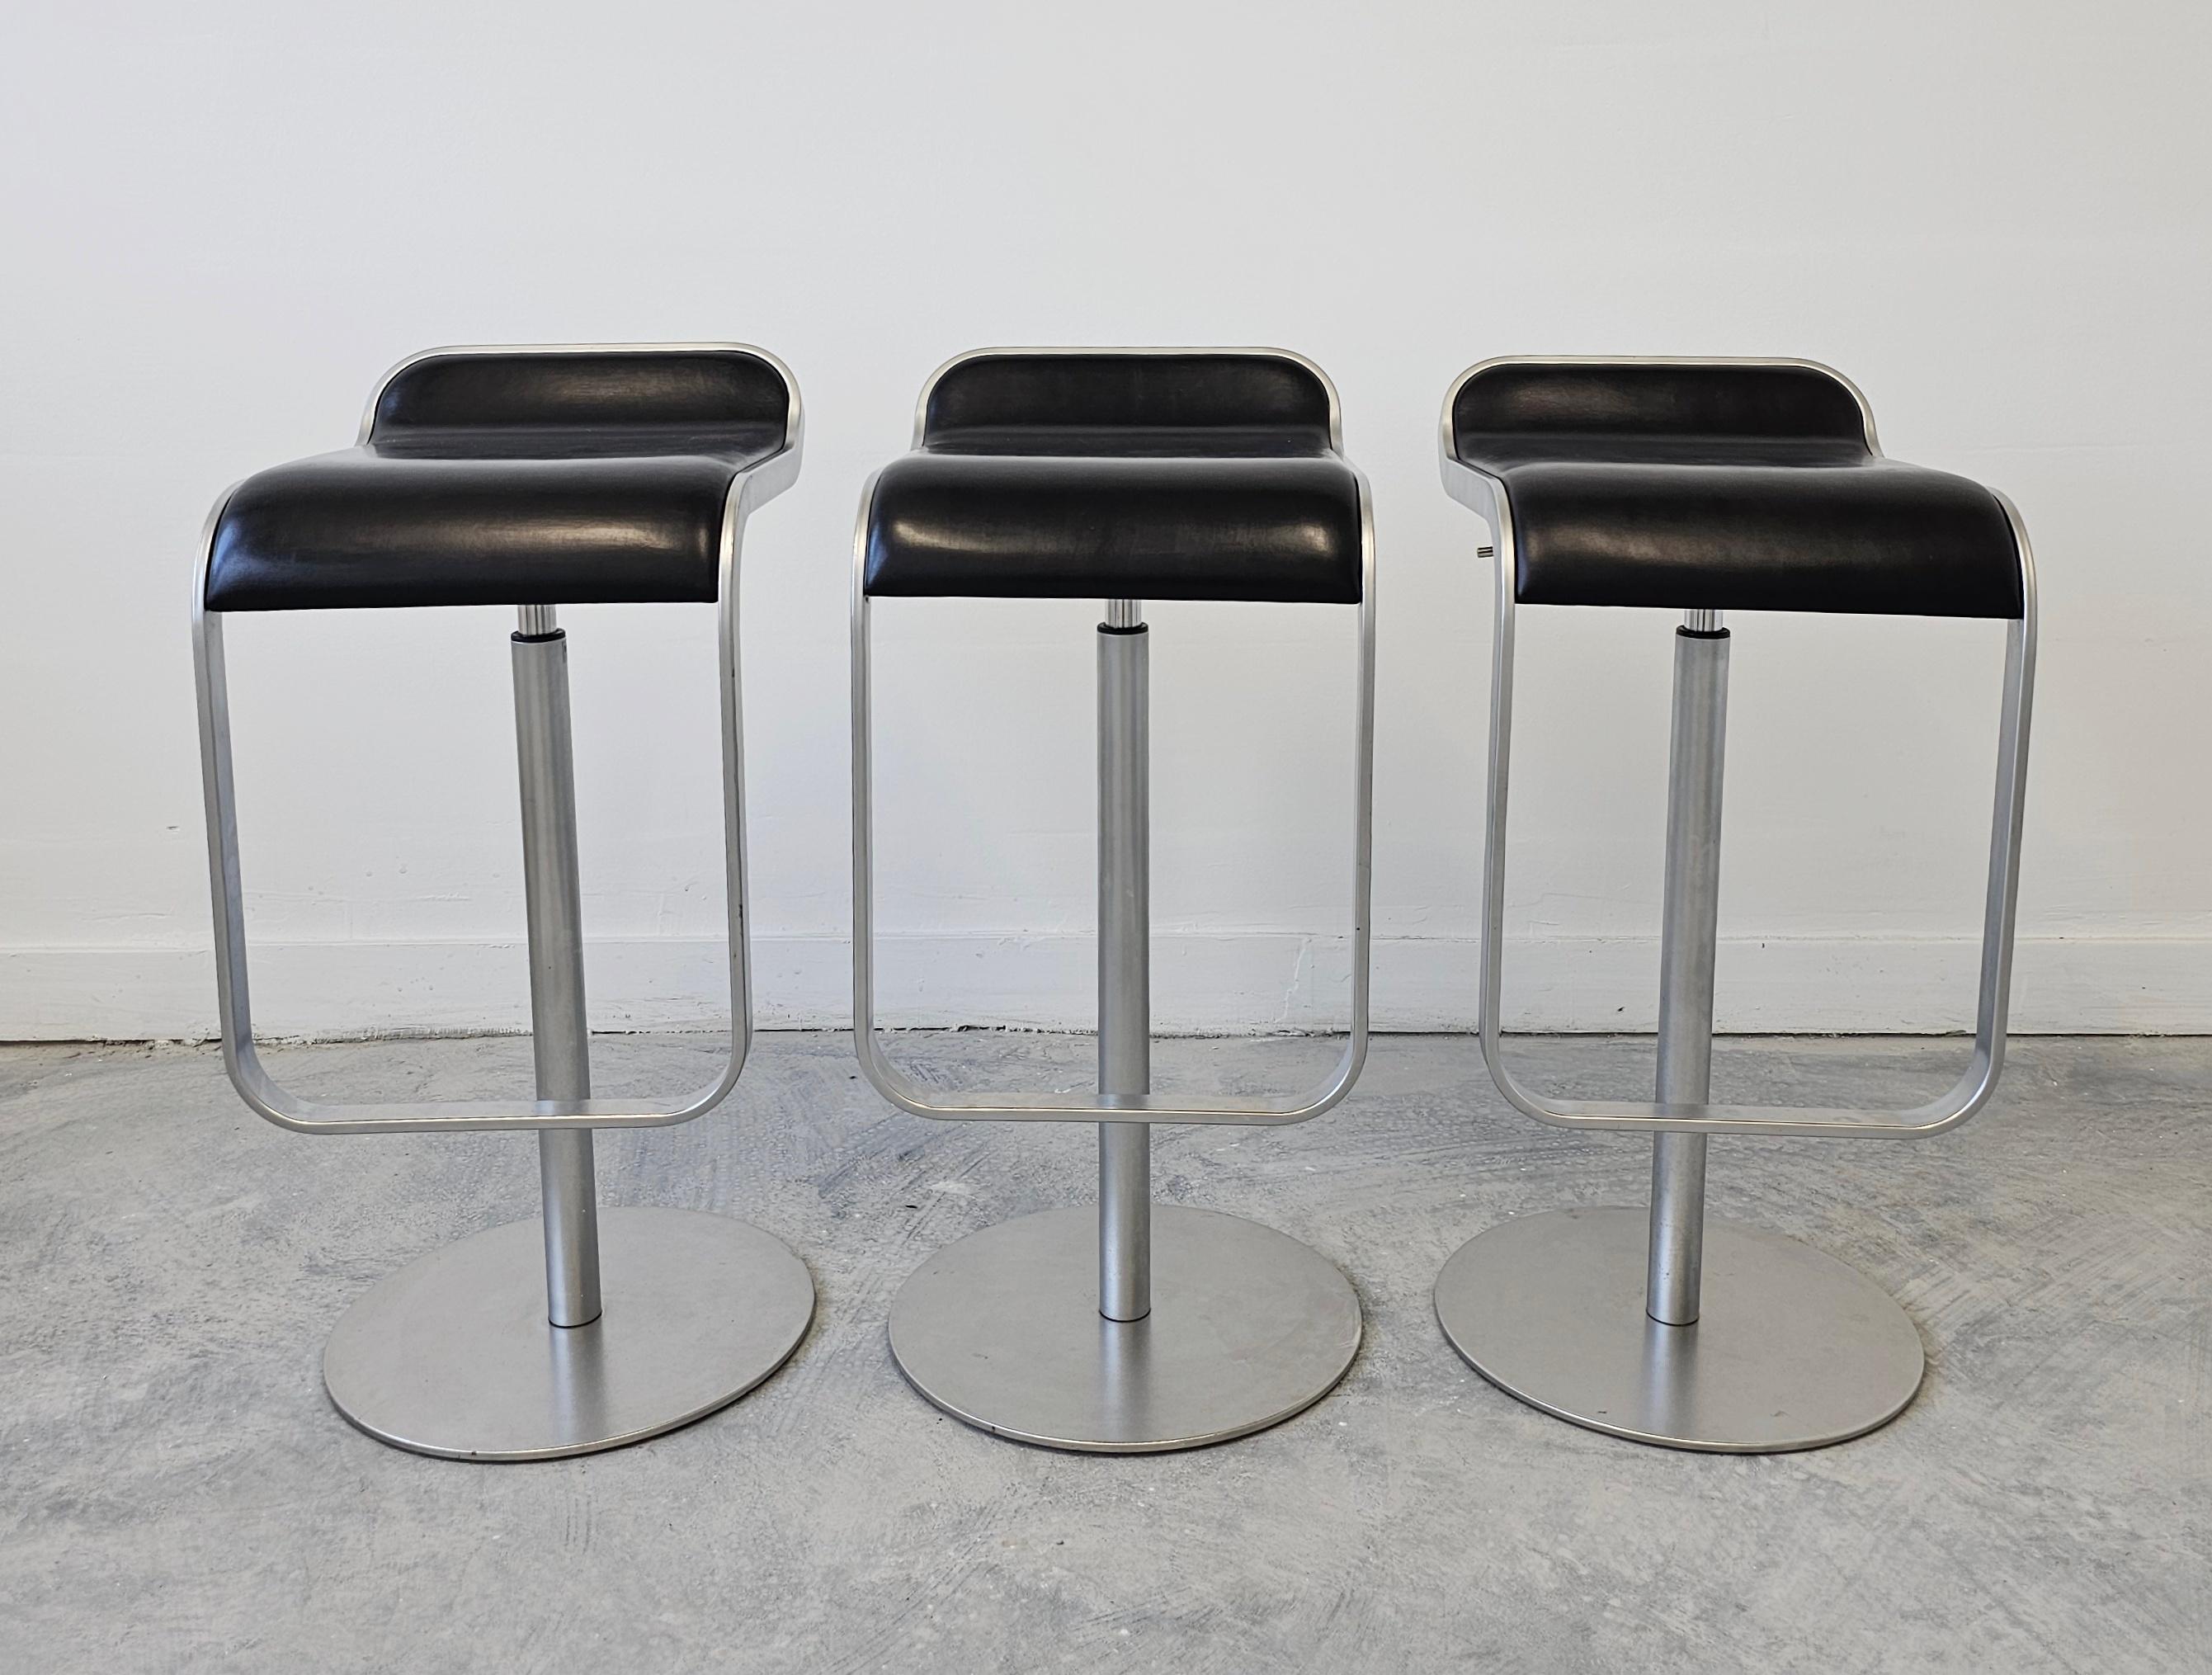 In this listing you will find a set of 3 minimalist barstools, model LEM, manufactured by LaPalma. 

The LEM bar stools were designed by Shin and Tomoko Azumi and named Product of the Year at the FX International Interior Design Awards in 2000.